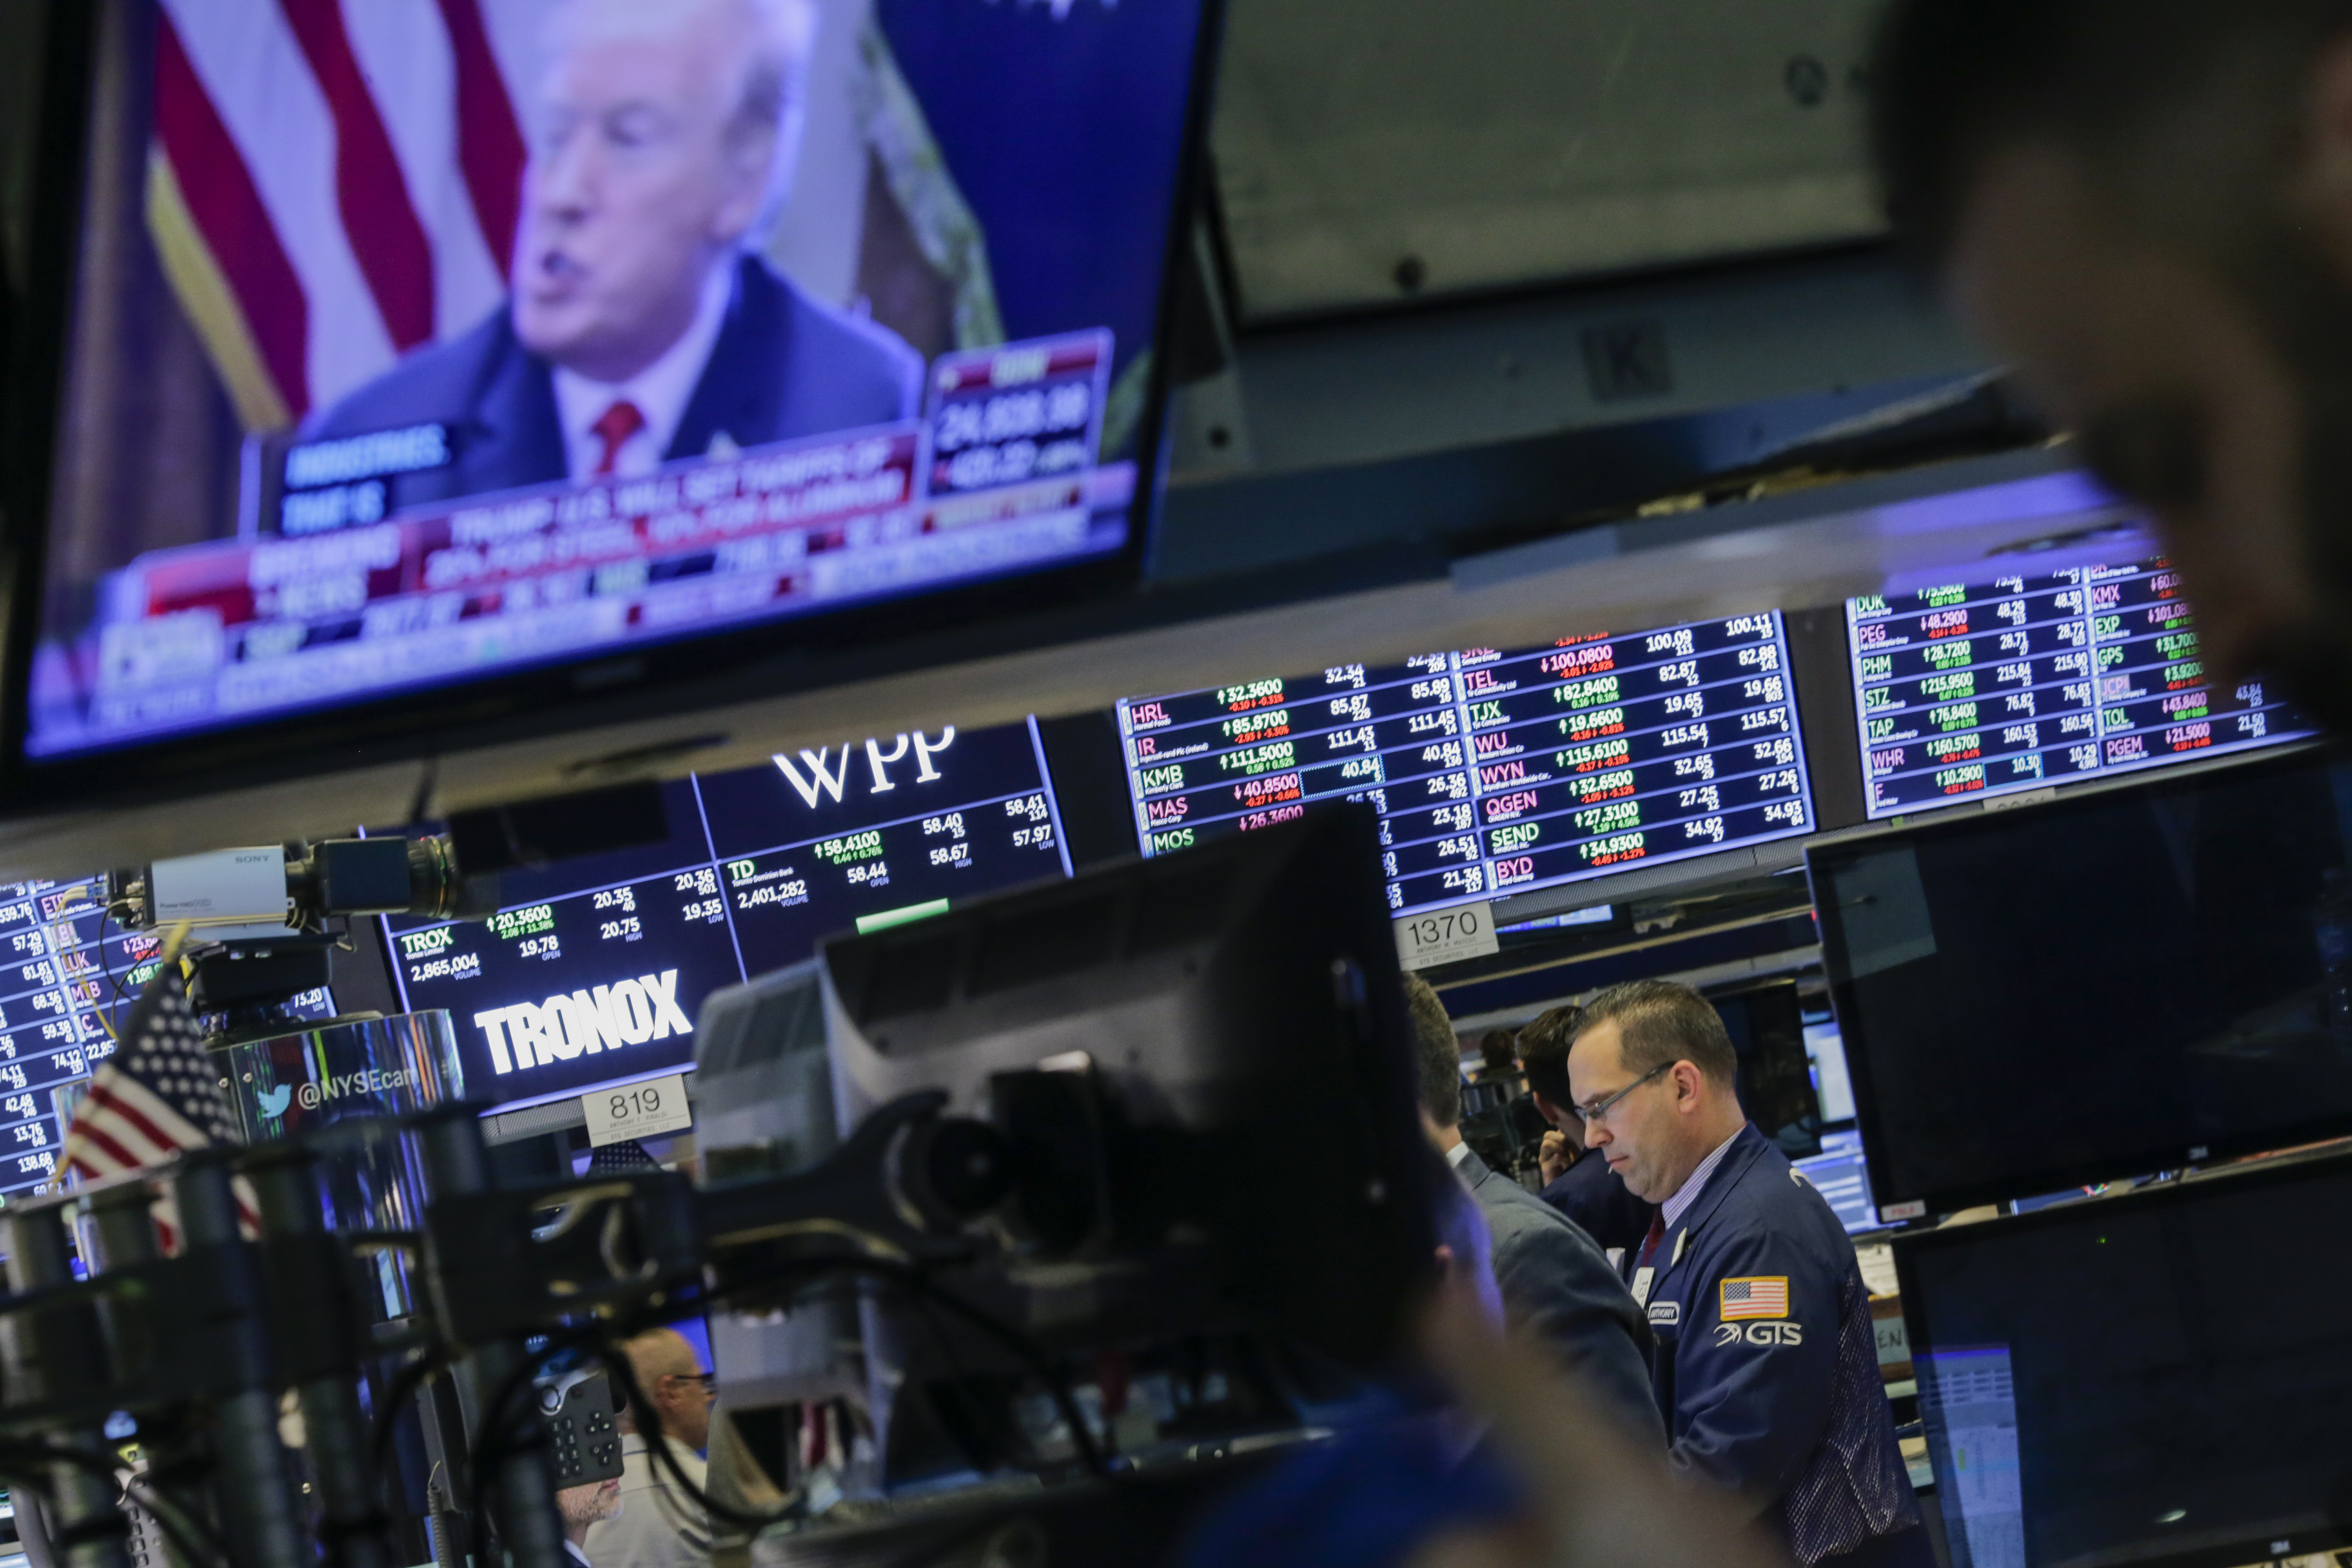 The Stock Market Is Plunging Again. This Time, It's About Trump